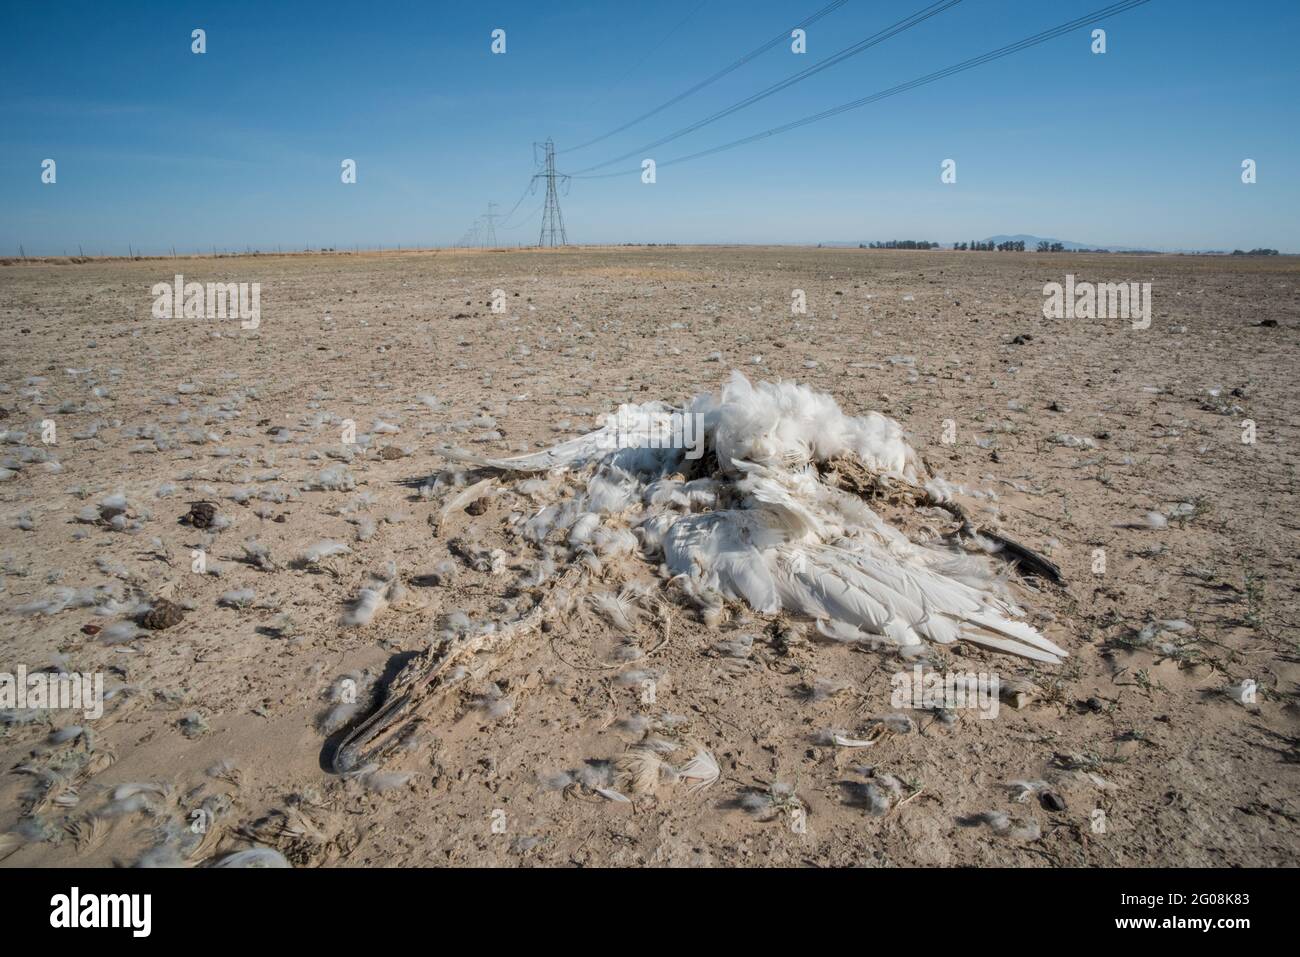 A dead tundra swan (Cygnus columbianus) in California, one of millions of birds killed as a result of a collision with power lines. Stock Photo